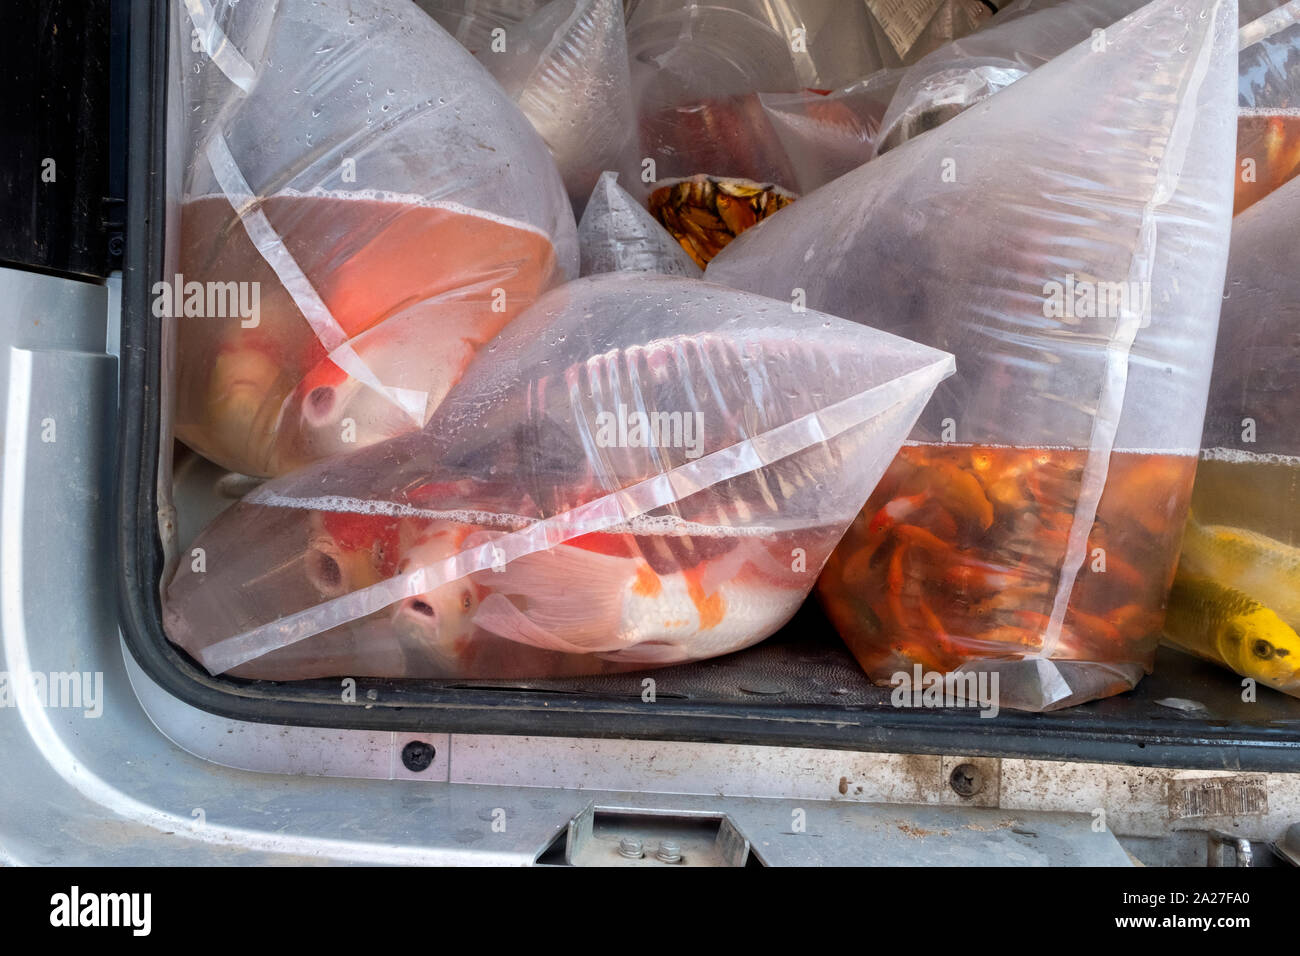 Transporting fish in plastic bags Stock Photo - Alamy